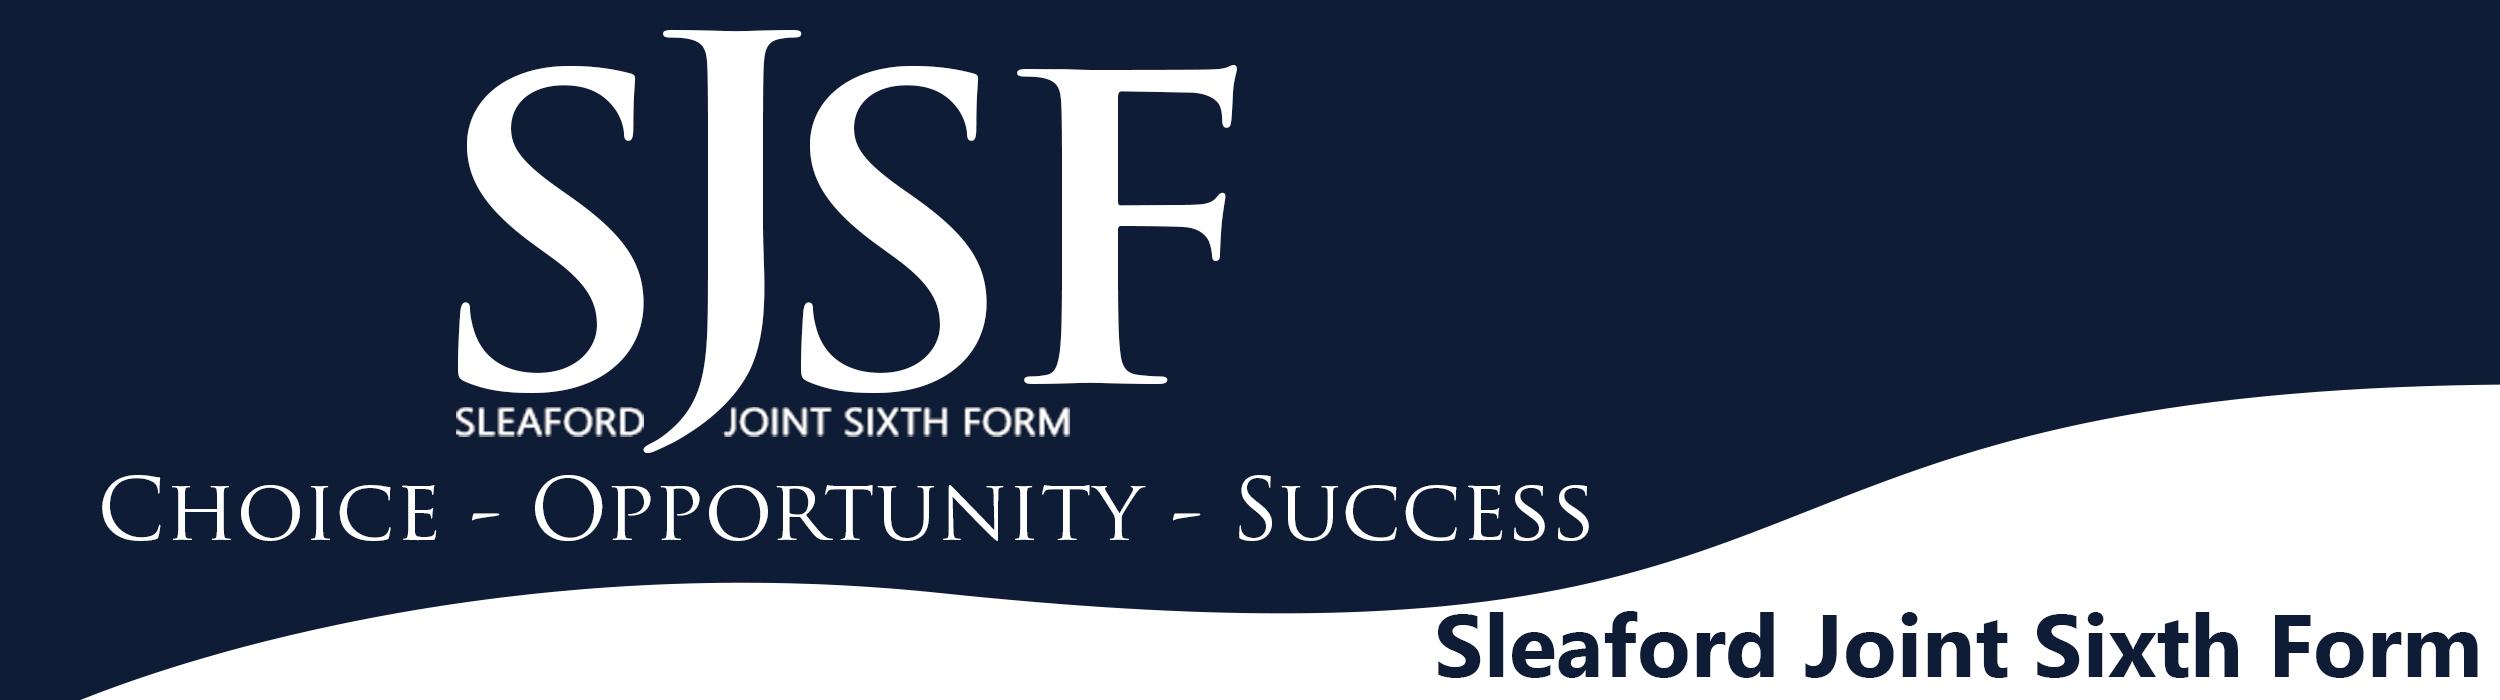 Sleaford Joint Sixth Form